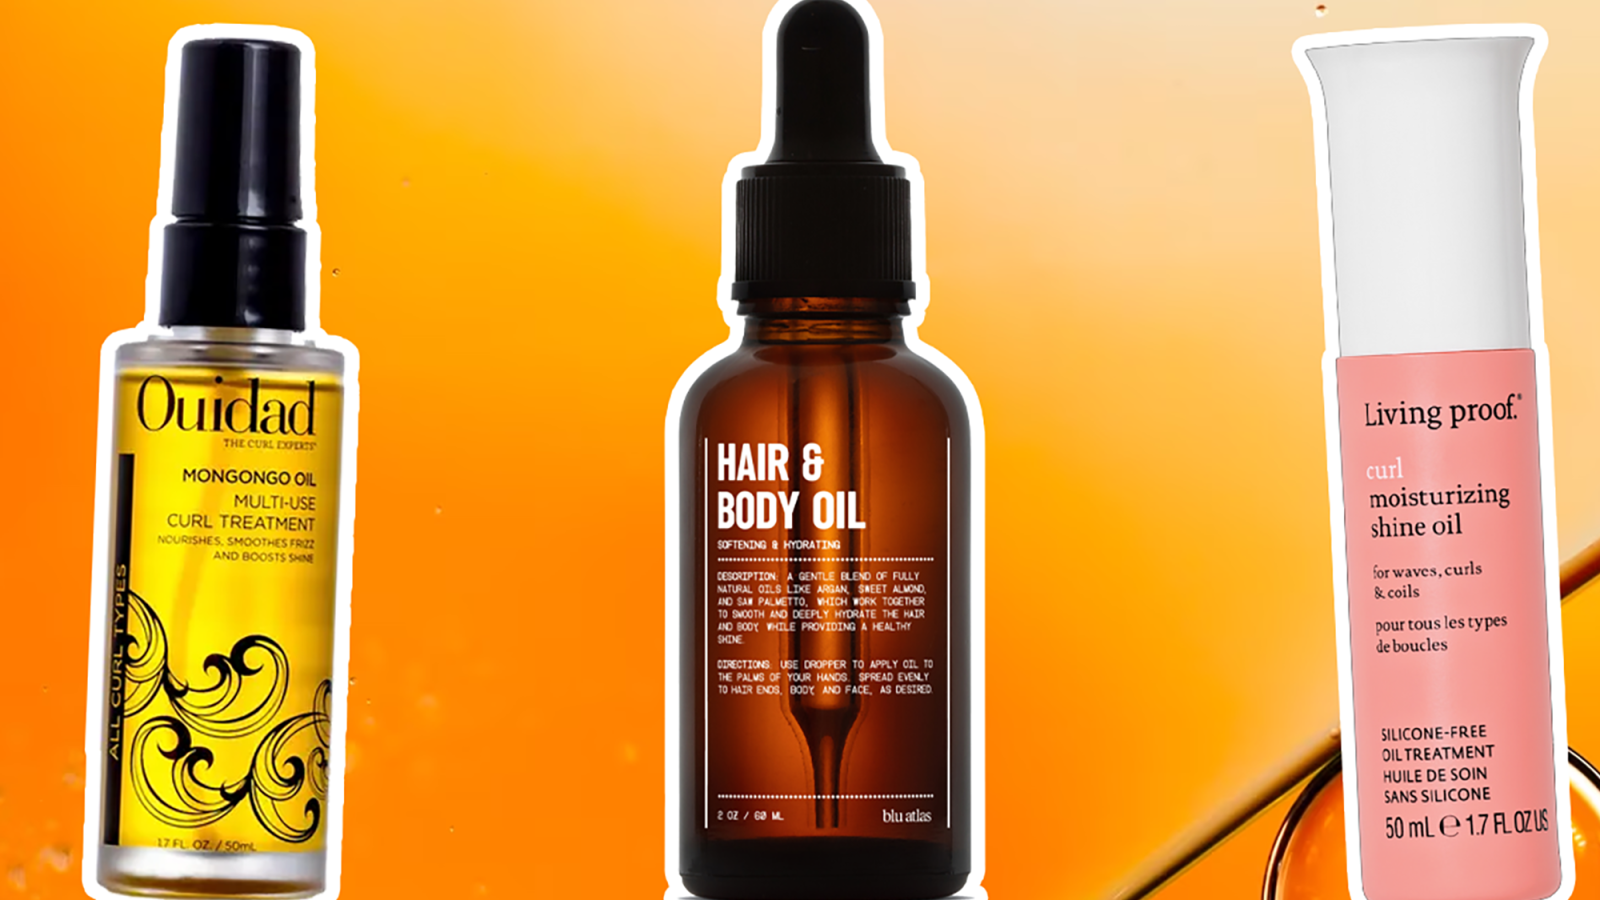 The 18 Best Hair Oils for Curly Hair